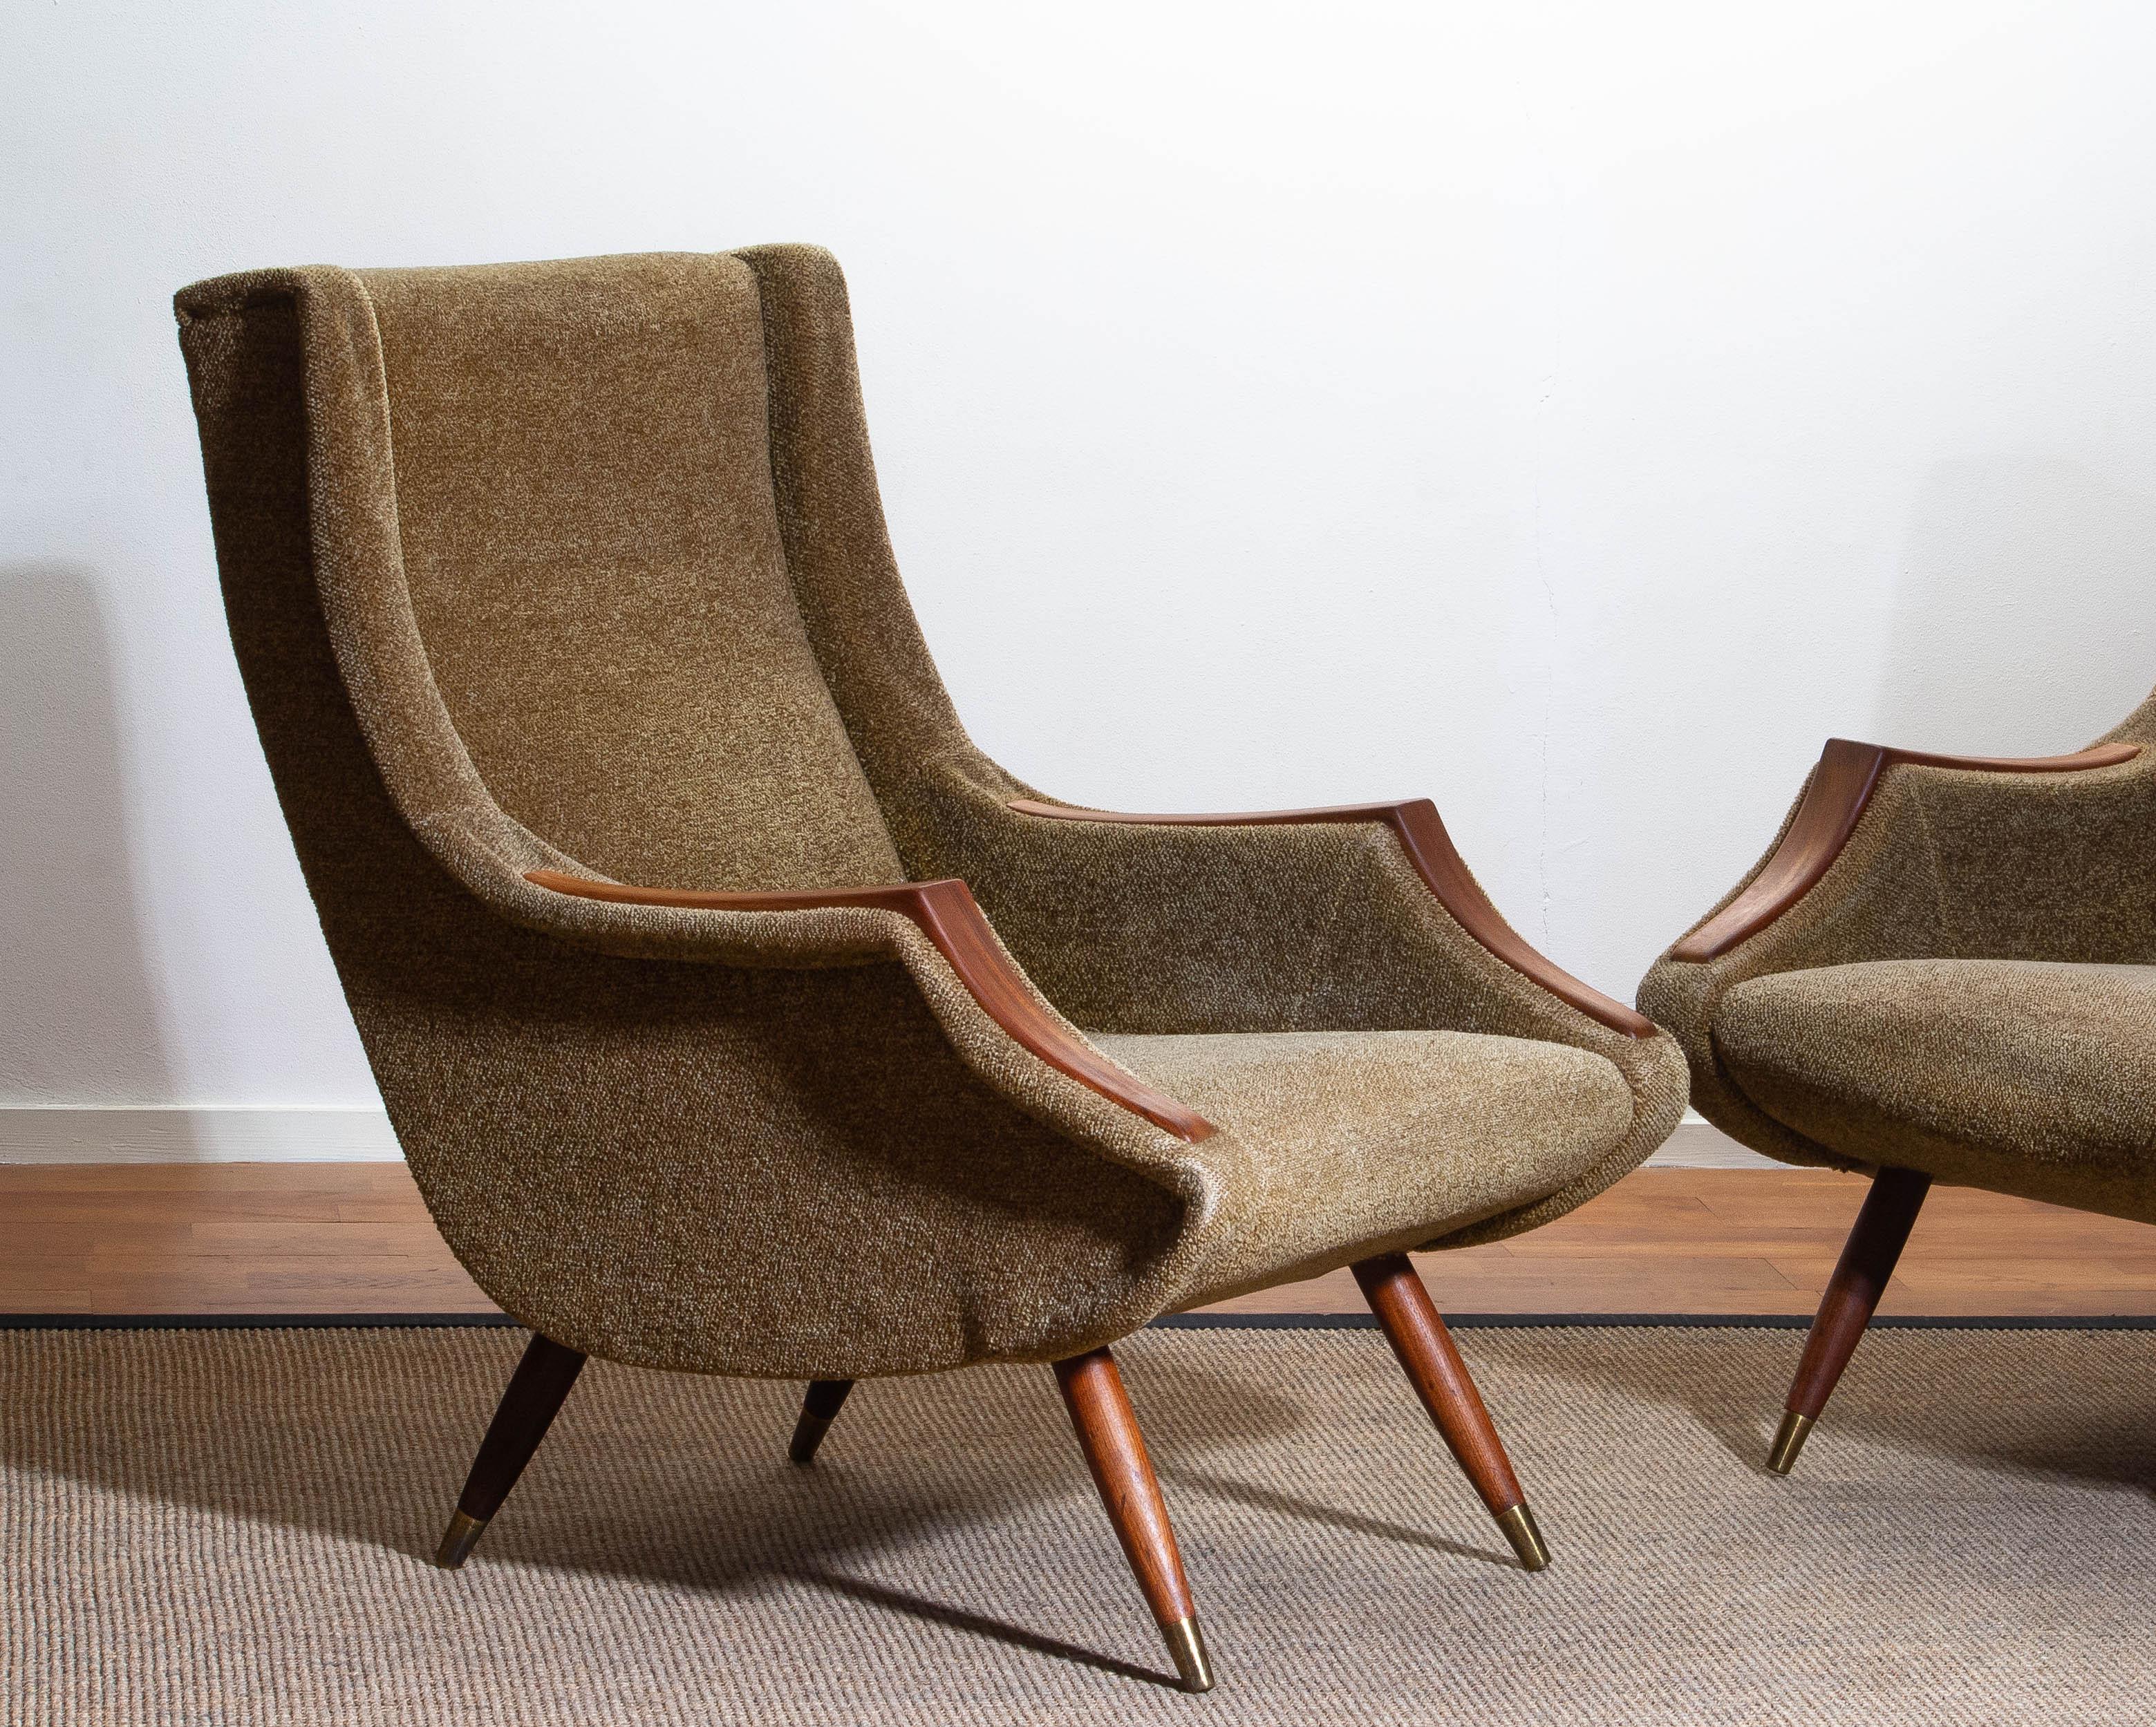 1950s extremely rare pair easy / lounge chairs designed by Aldo Morbelli for Isa Bergamo Italy, both still in original condition.
Armrests and legs in teak.
Overall impression for the age is good.
One chair shows slide discoloration to one side.